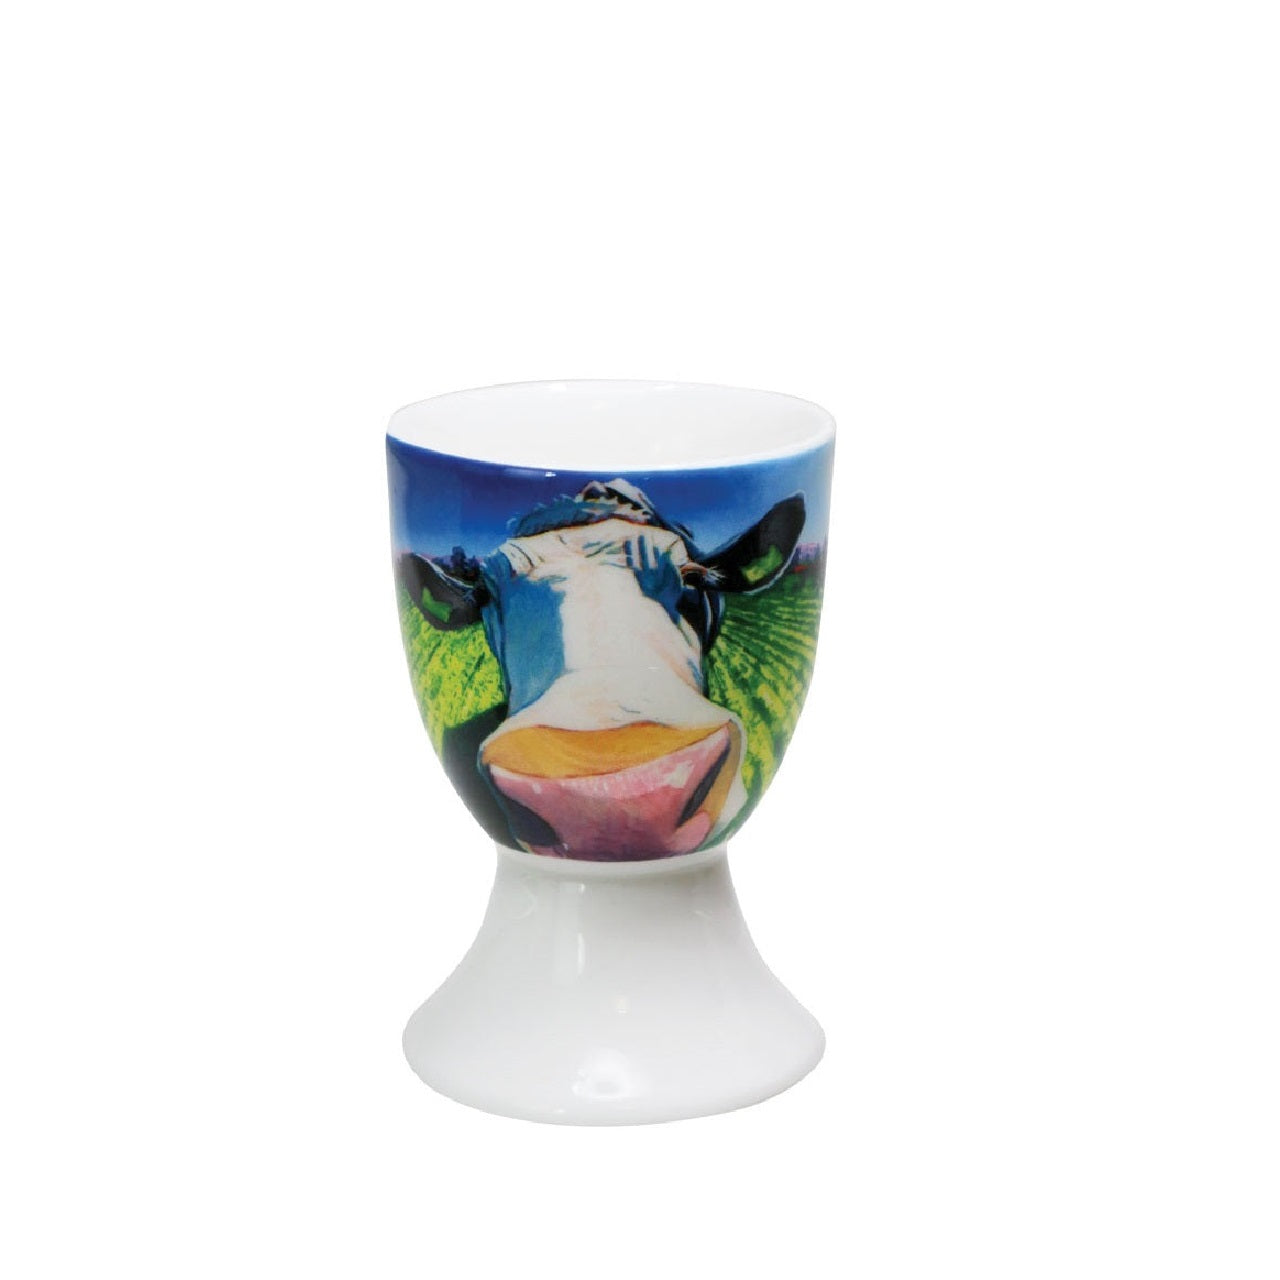 Eoin O'Connor Cow Egg Cup Set of Four  EOIN O’CONNOR’S eclectic style and striking use of colour makes his work instantly recognisable. While his command over scale and perspective is rooted in his architectural training, his passion remains firmly grounded in creating strikingly vibrant paintings which echo his unique view of Irish life.